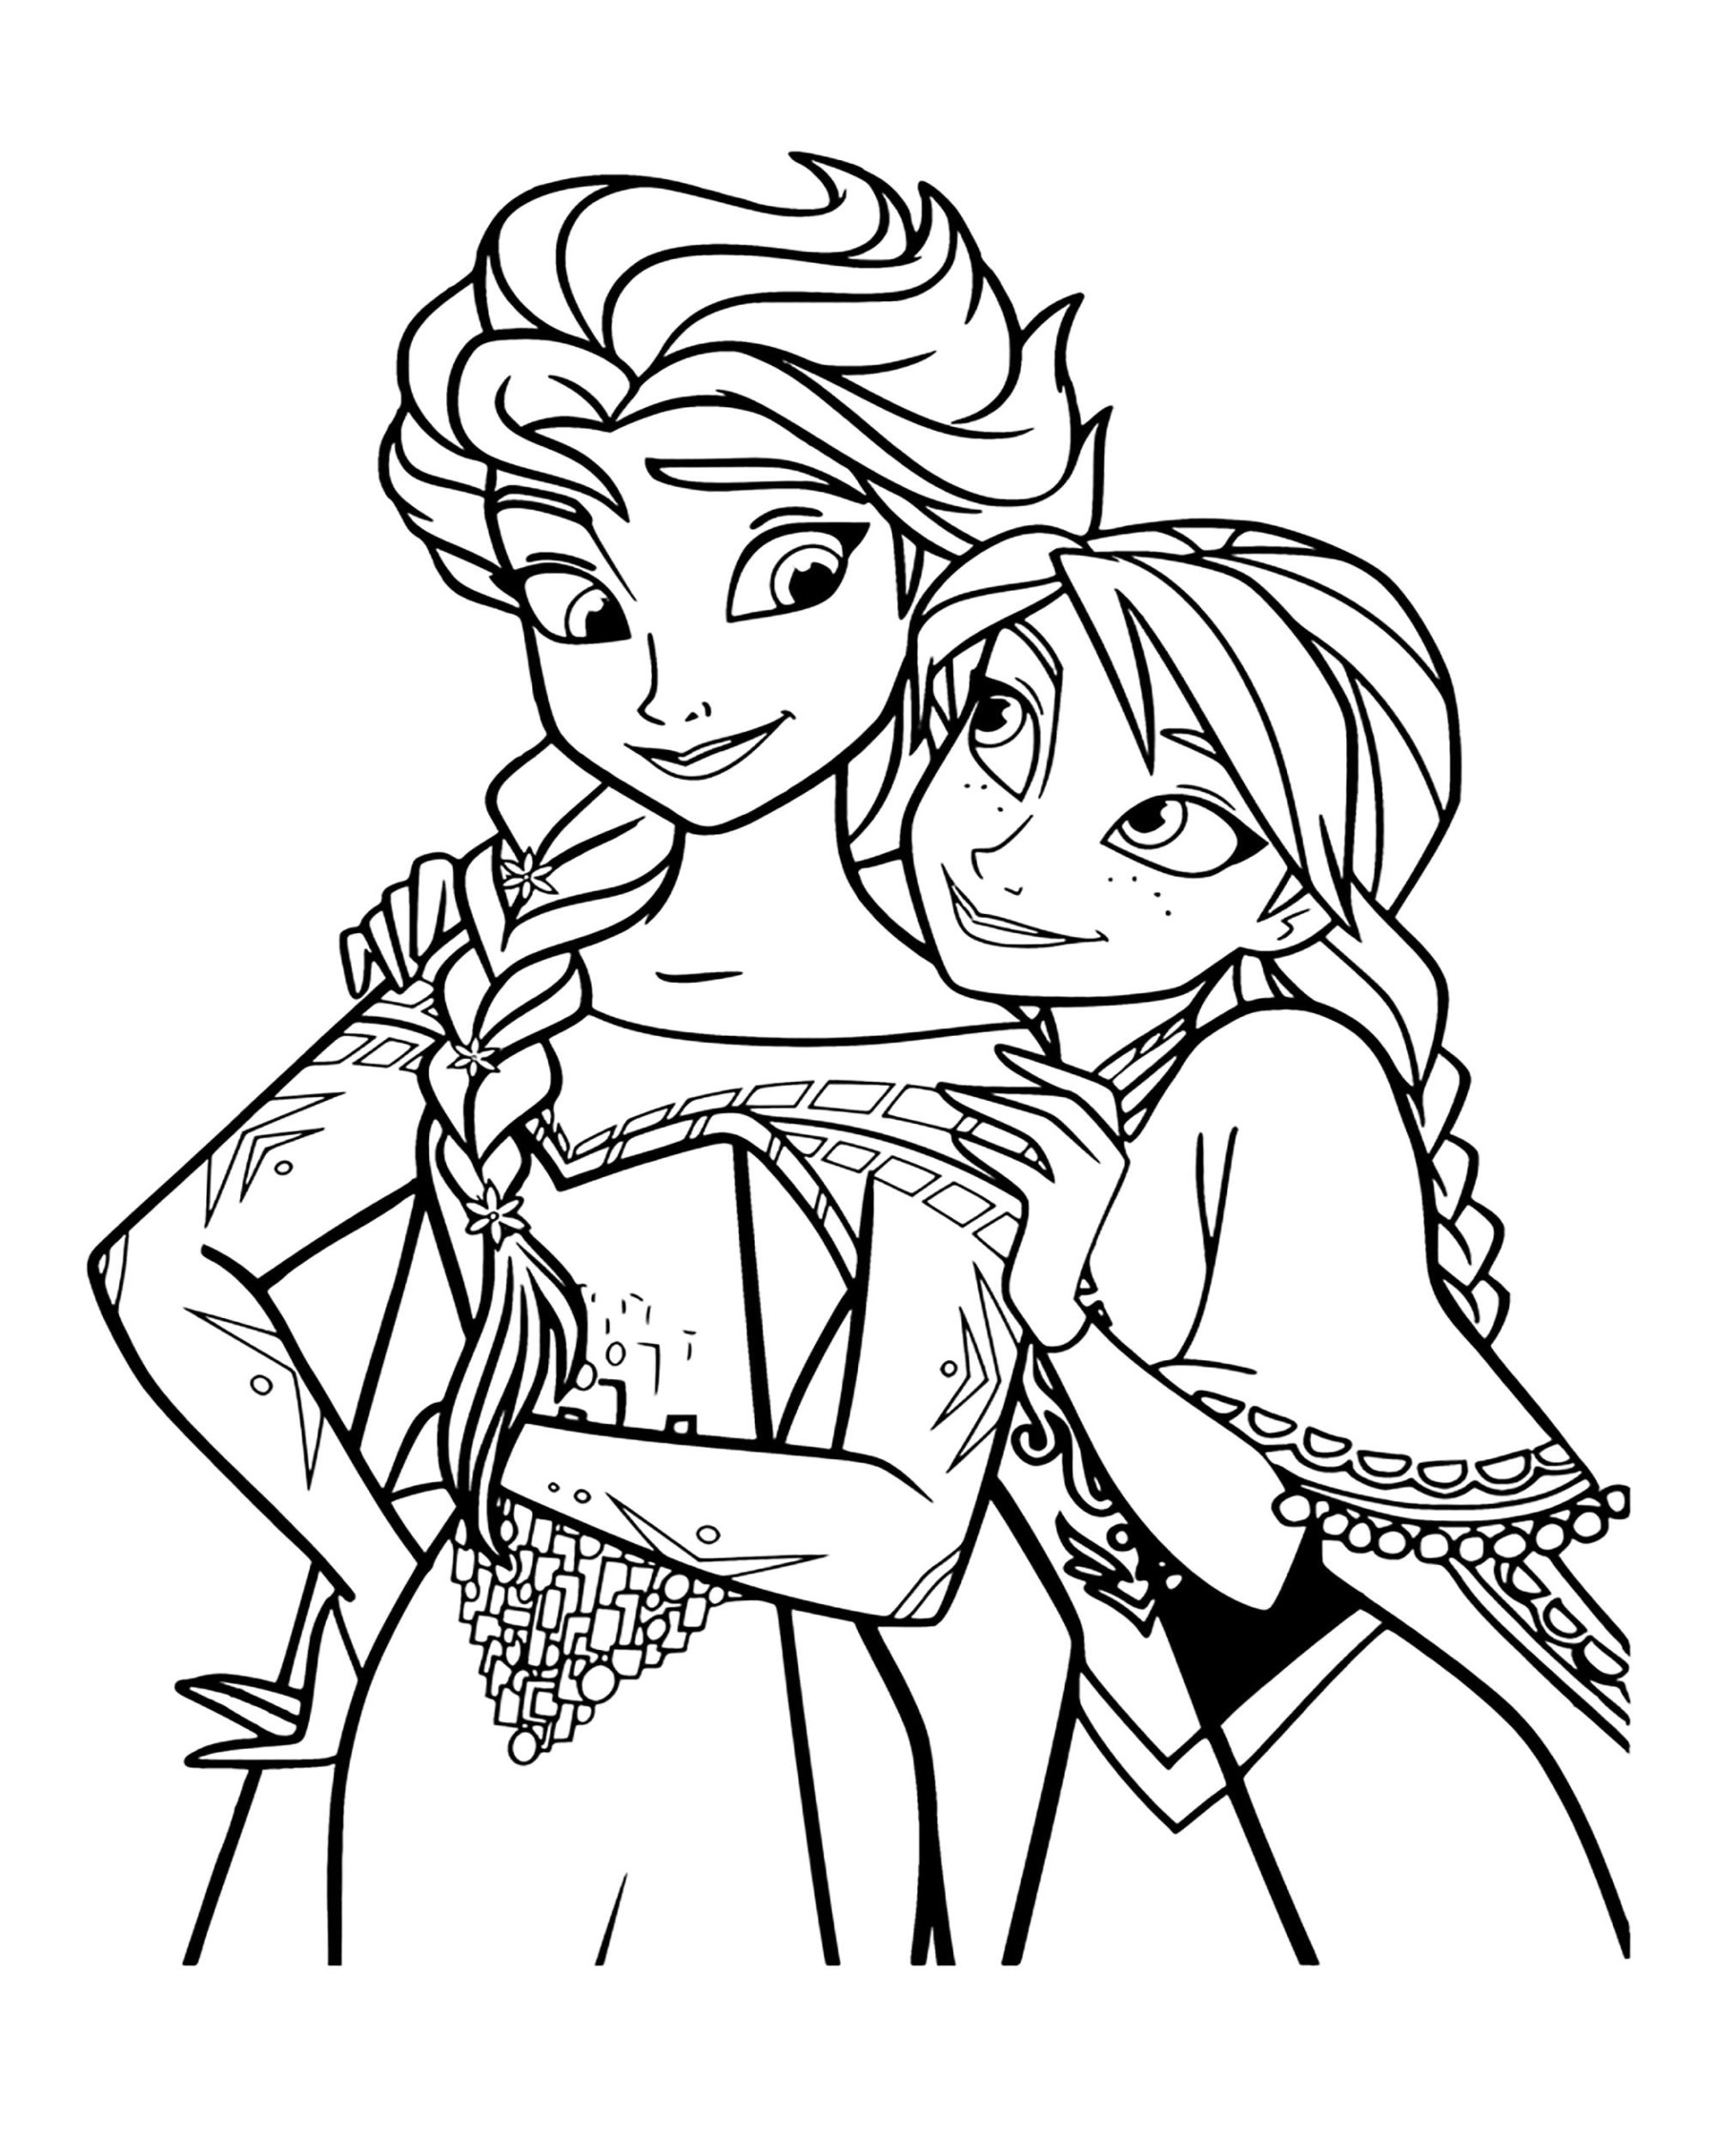 Frozen - Anna and Elsa - coloring page